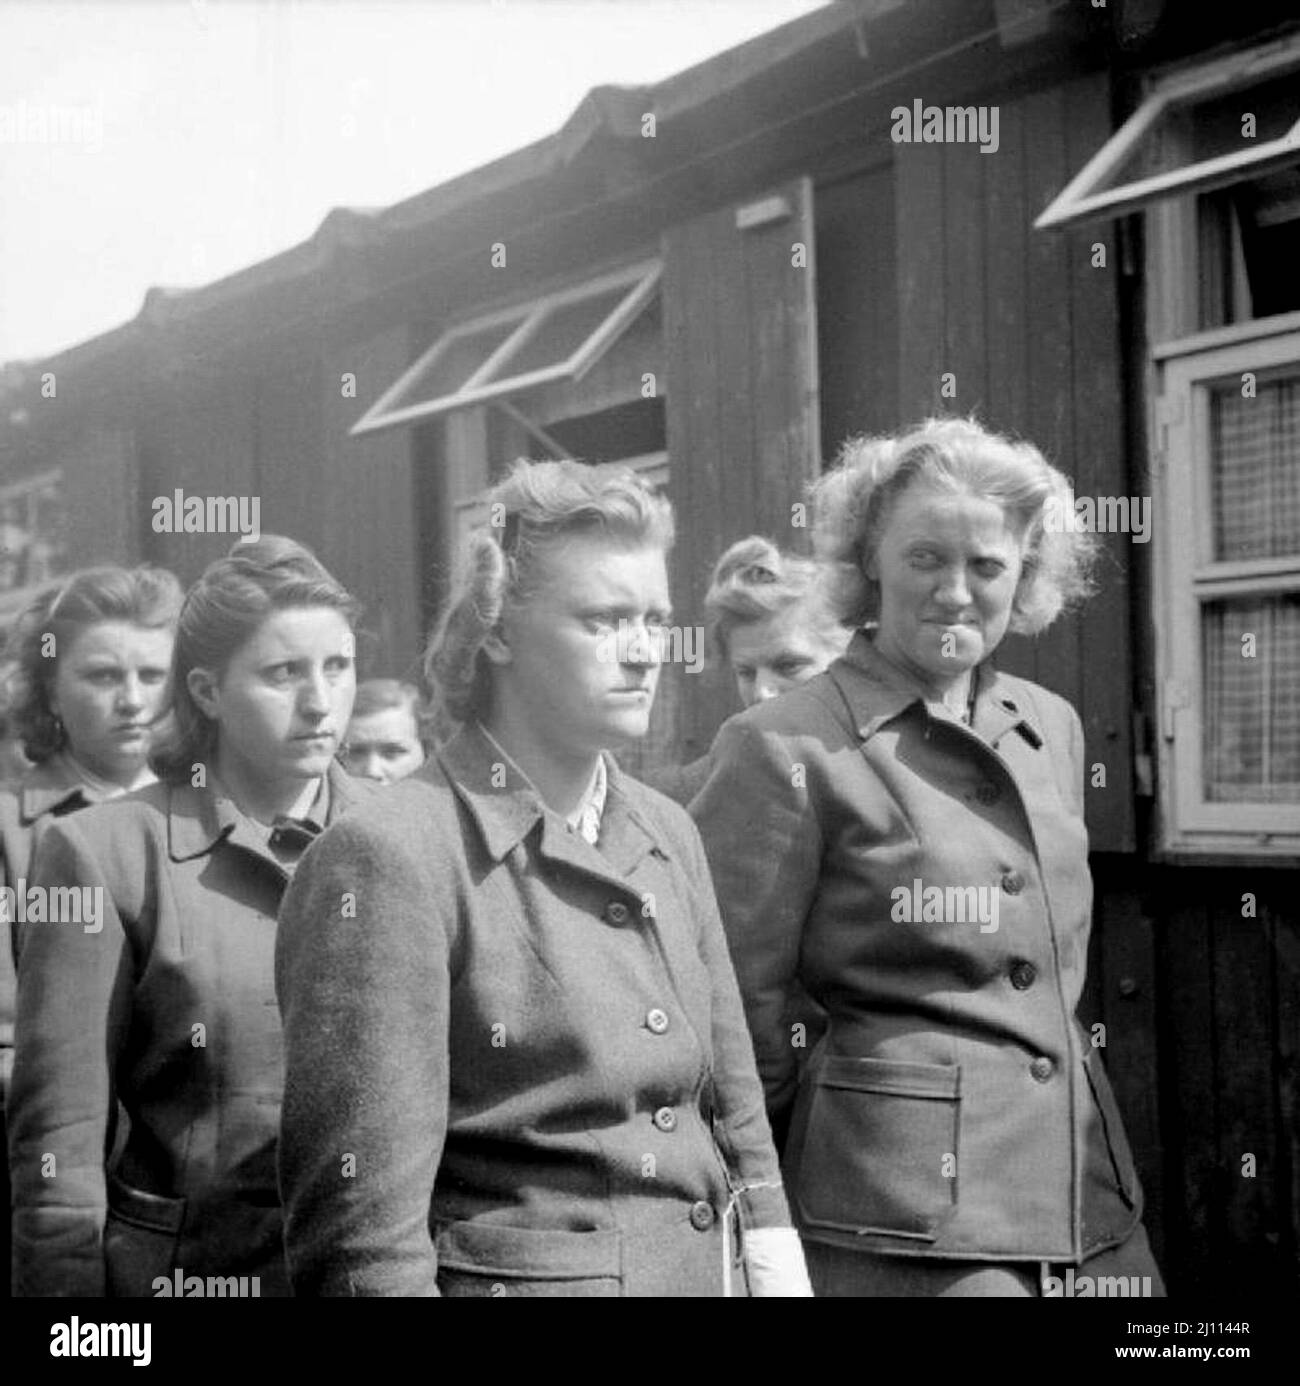 SS women camp guards are paraded for work in clearing the dead. The women include Hildegard Kanbach (first from left), Irene Haschke (centre, third from right), the Head Wardress, Elisabeth Volkenrath (second from right, partially hidden) and Herta Bothe (first from right). Herta Bothe accompanied a death march of women from central Poland to Bergen-Belsen. She was sentenced to 10 years imprisonment and released early from prison on December 22, 1951. Elisabeth Volkenrath was head wardress of the camp and sentenced to death. She was hanged on December 13 1945. Irene Haschke was sentenced to 10 Stock Photo